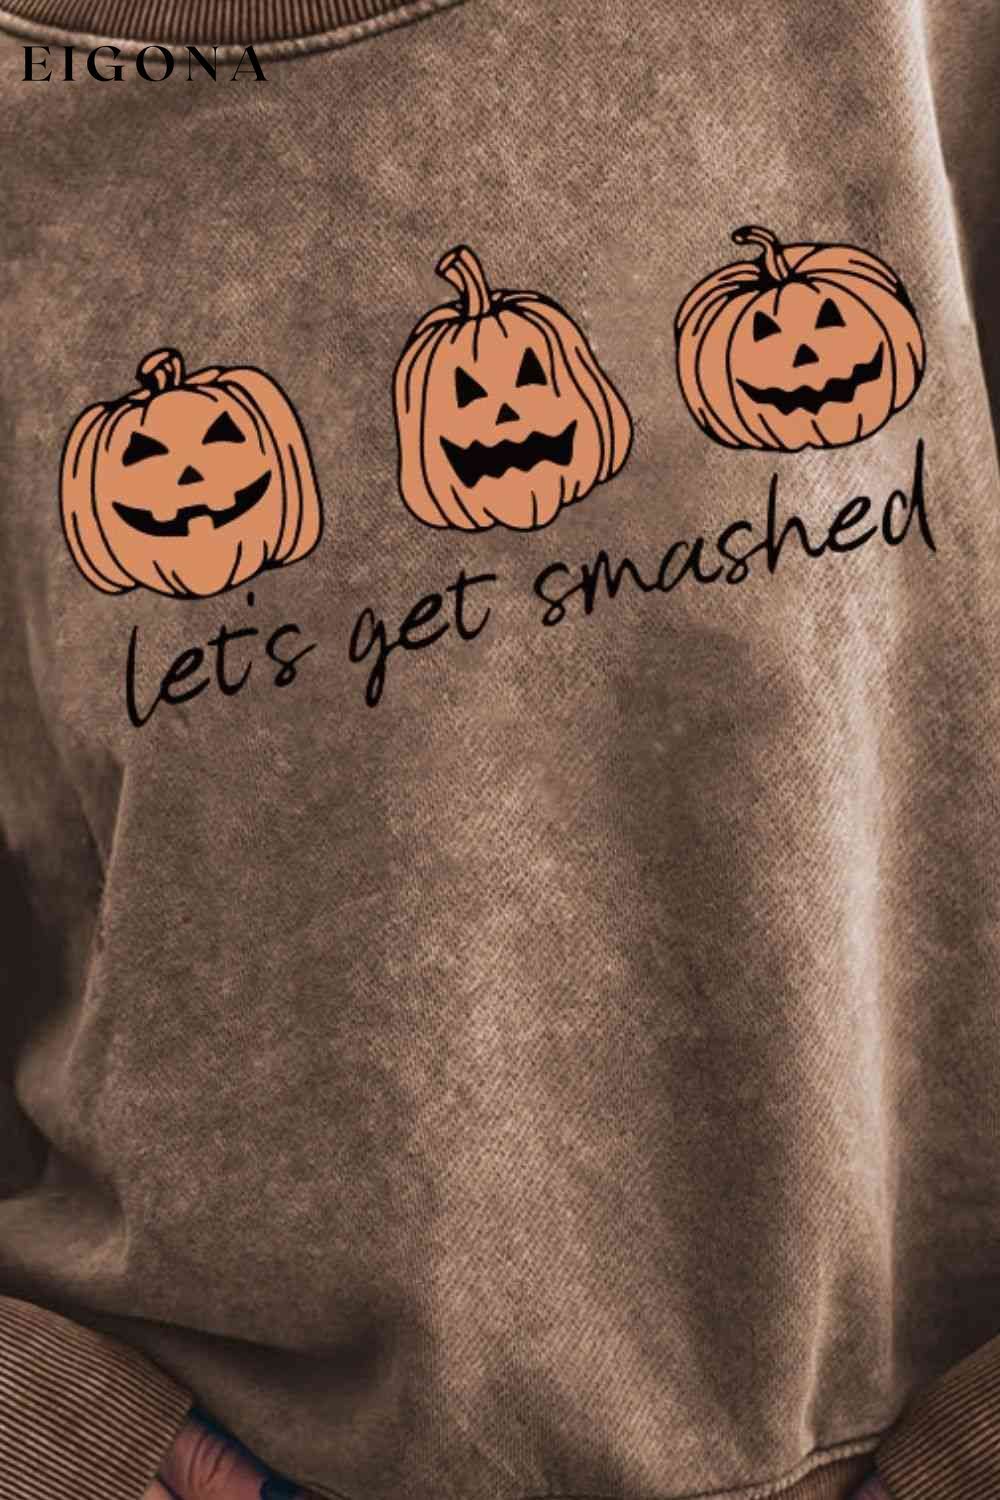 LET'S GET SMASHED Graphic Sweatshirt clothes halloween halloween sweaters Ship From Overseas sweater sweaters SYNZ